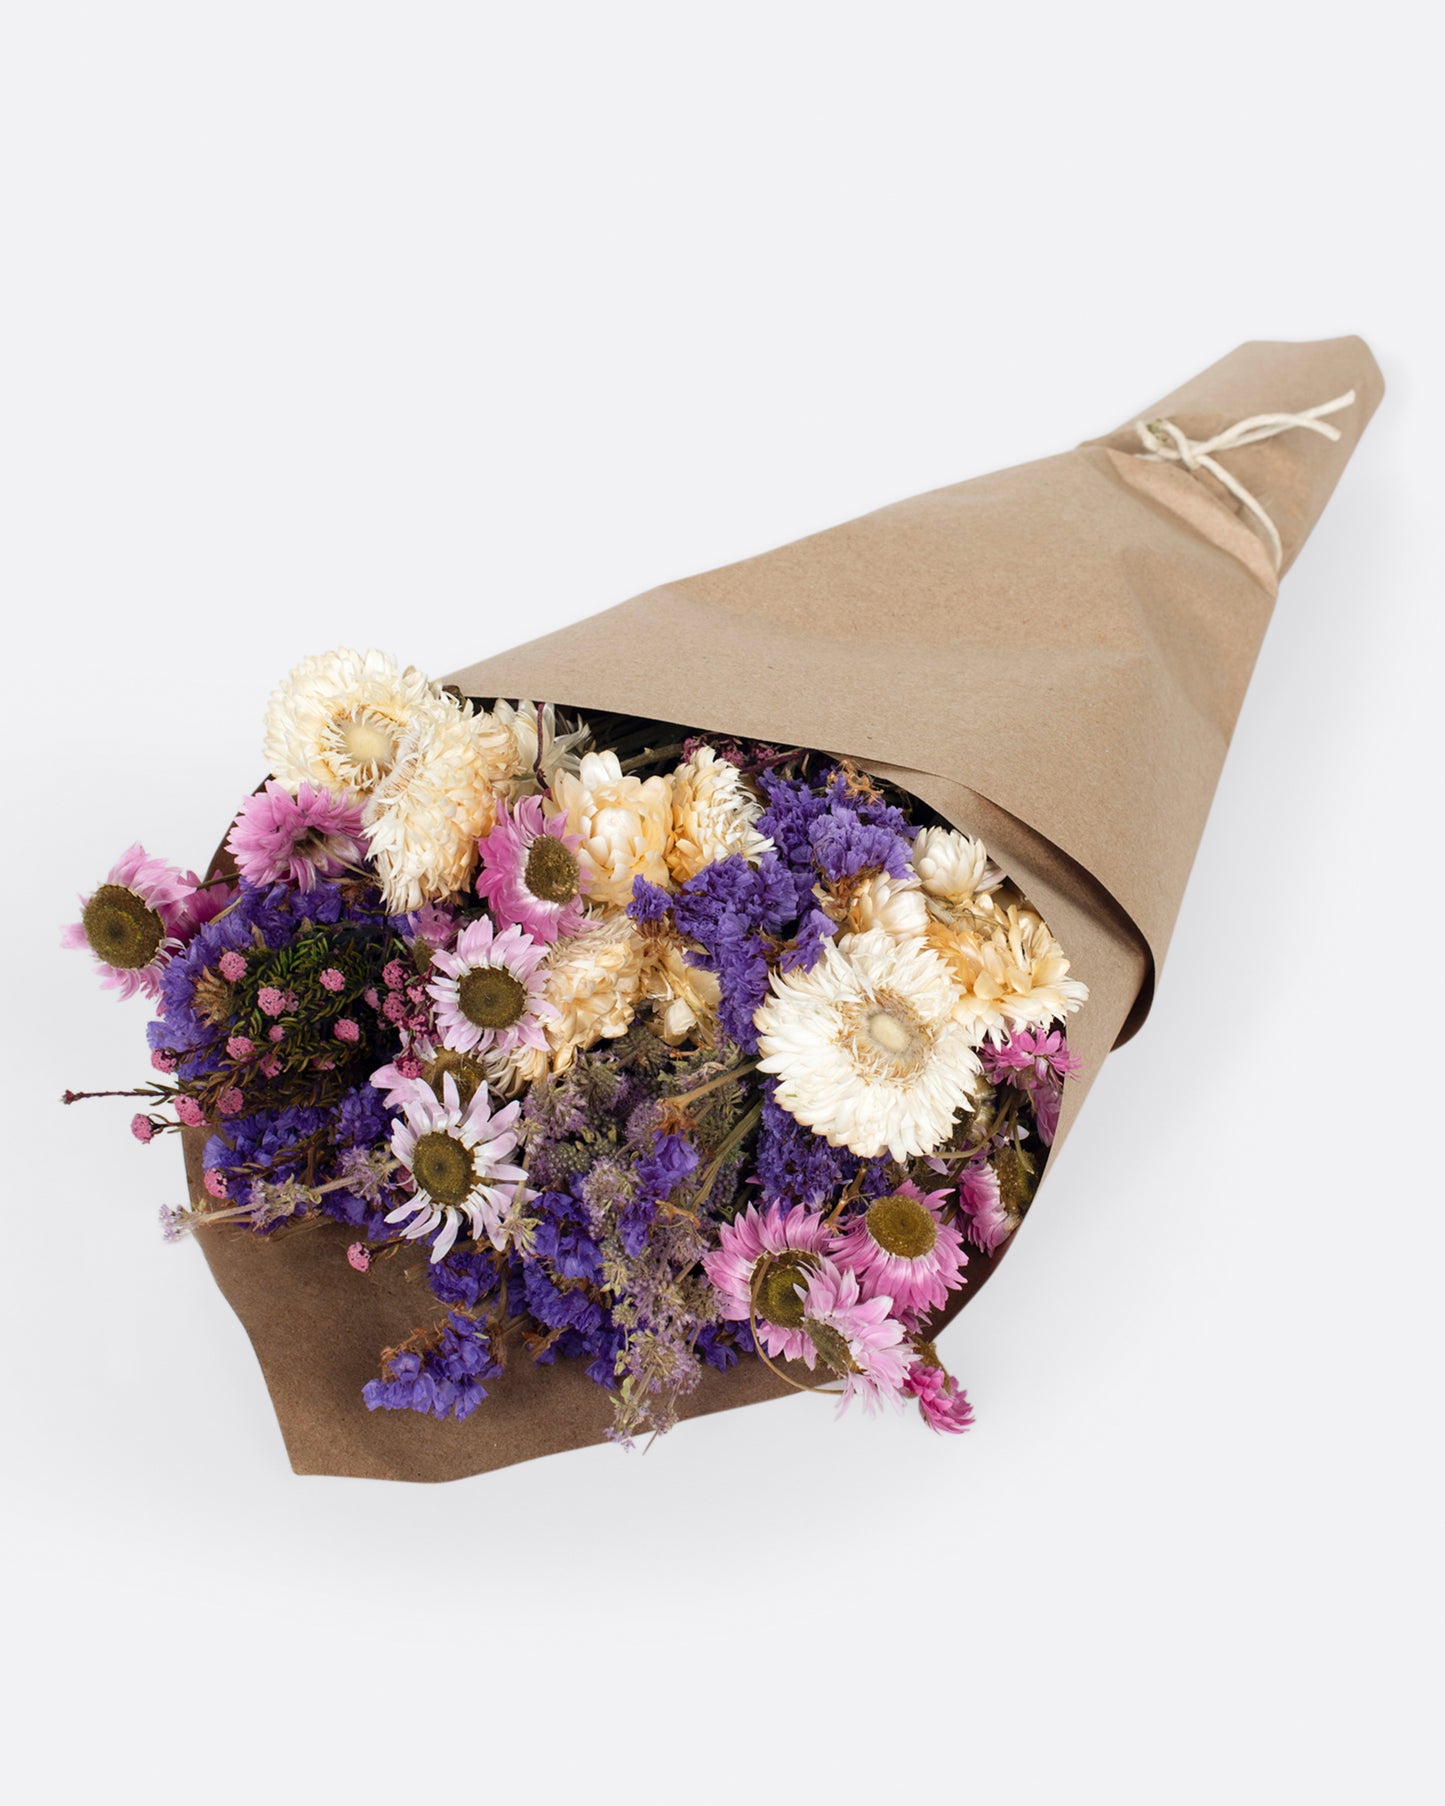 A handmade floral arrangement with purple, pink and white hues.